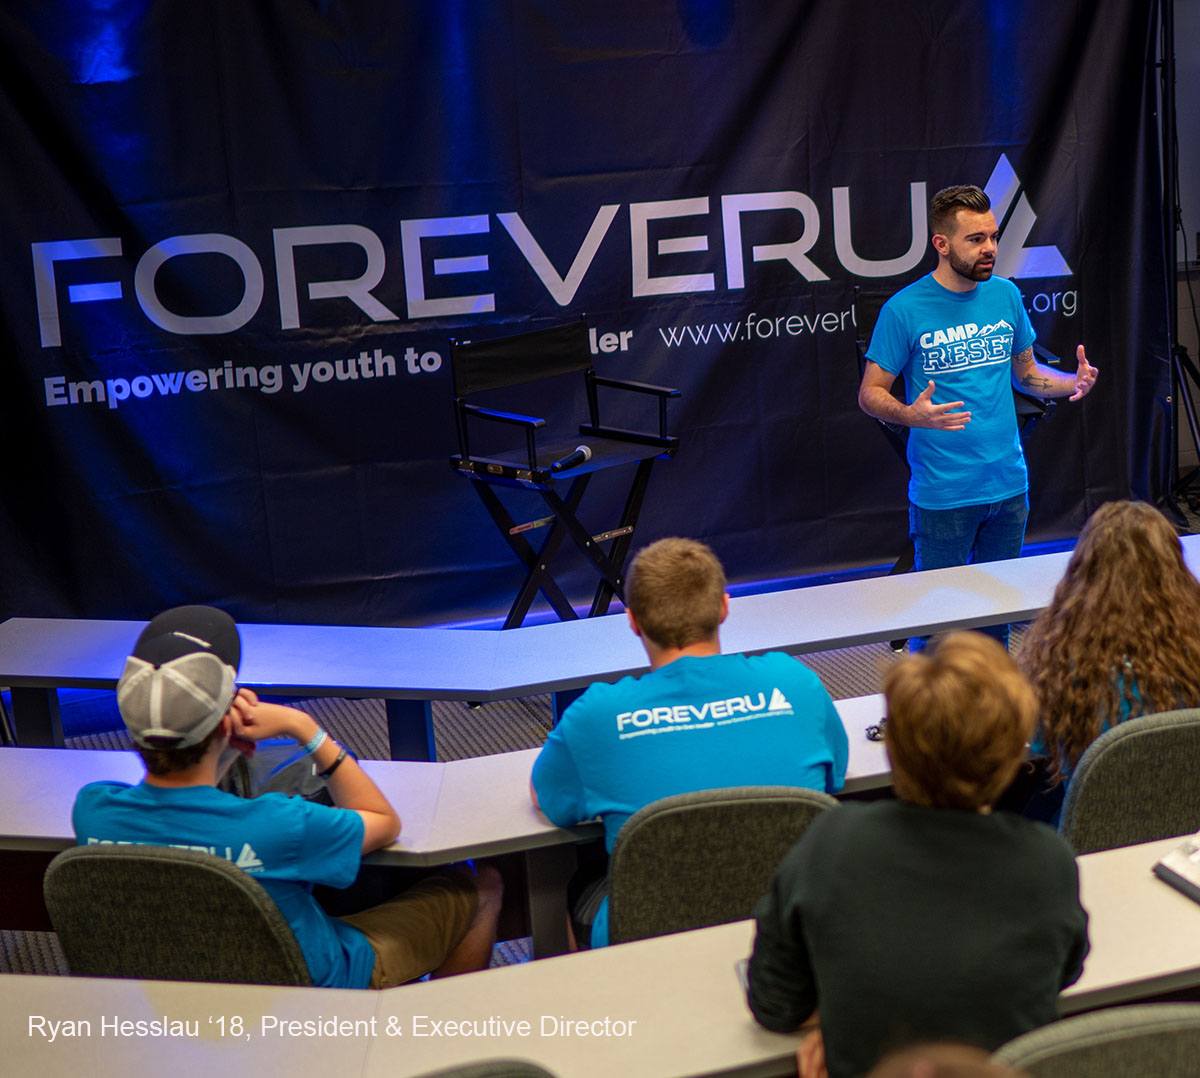 Several members of the Trinity community have been named to the board of foreverU, a youth empowerment organization founded by alumnus Ryan Hesslau ’18.